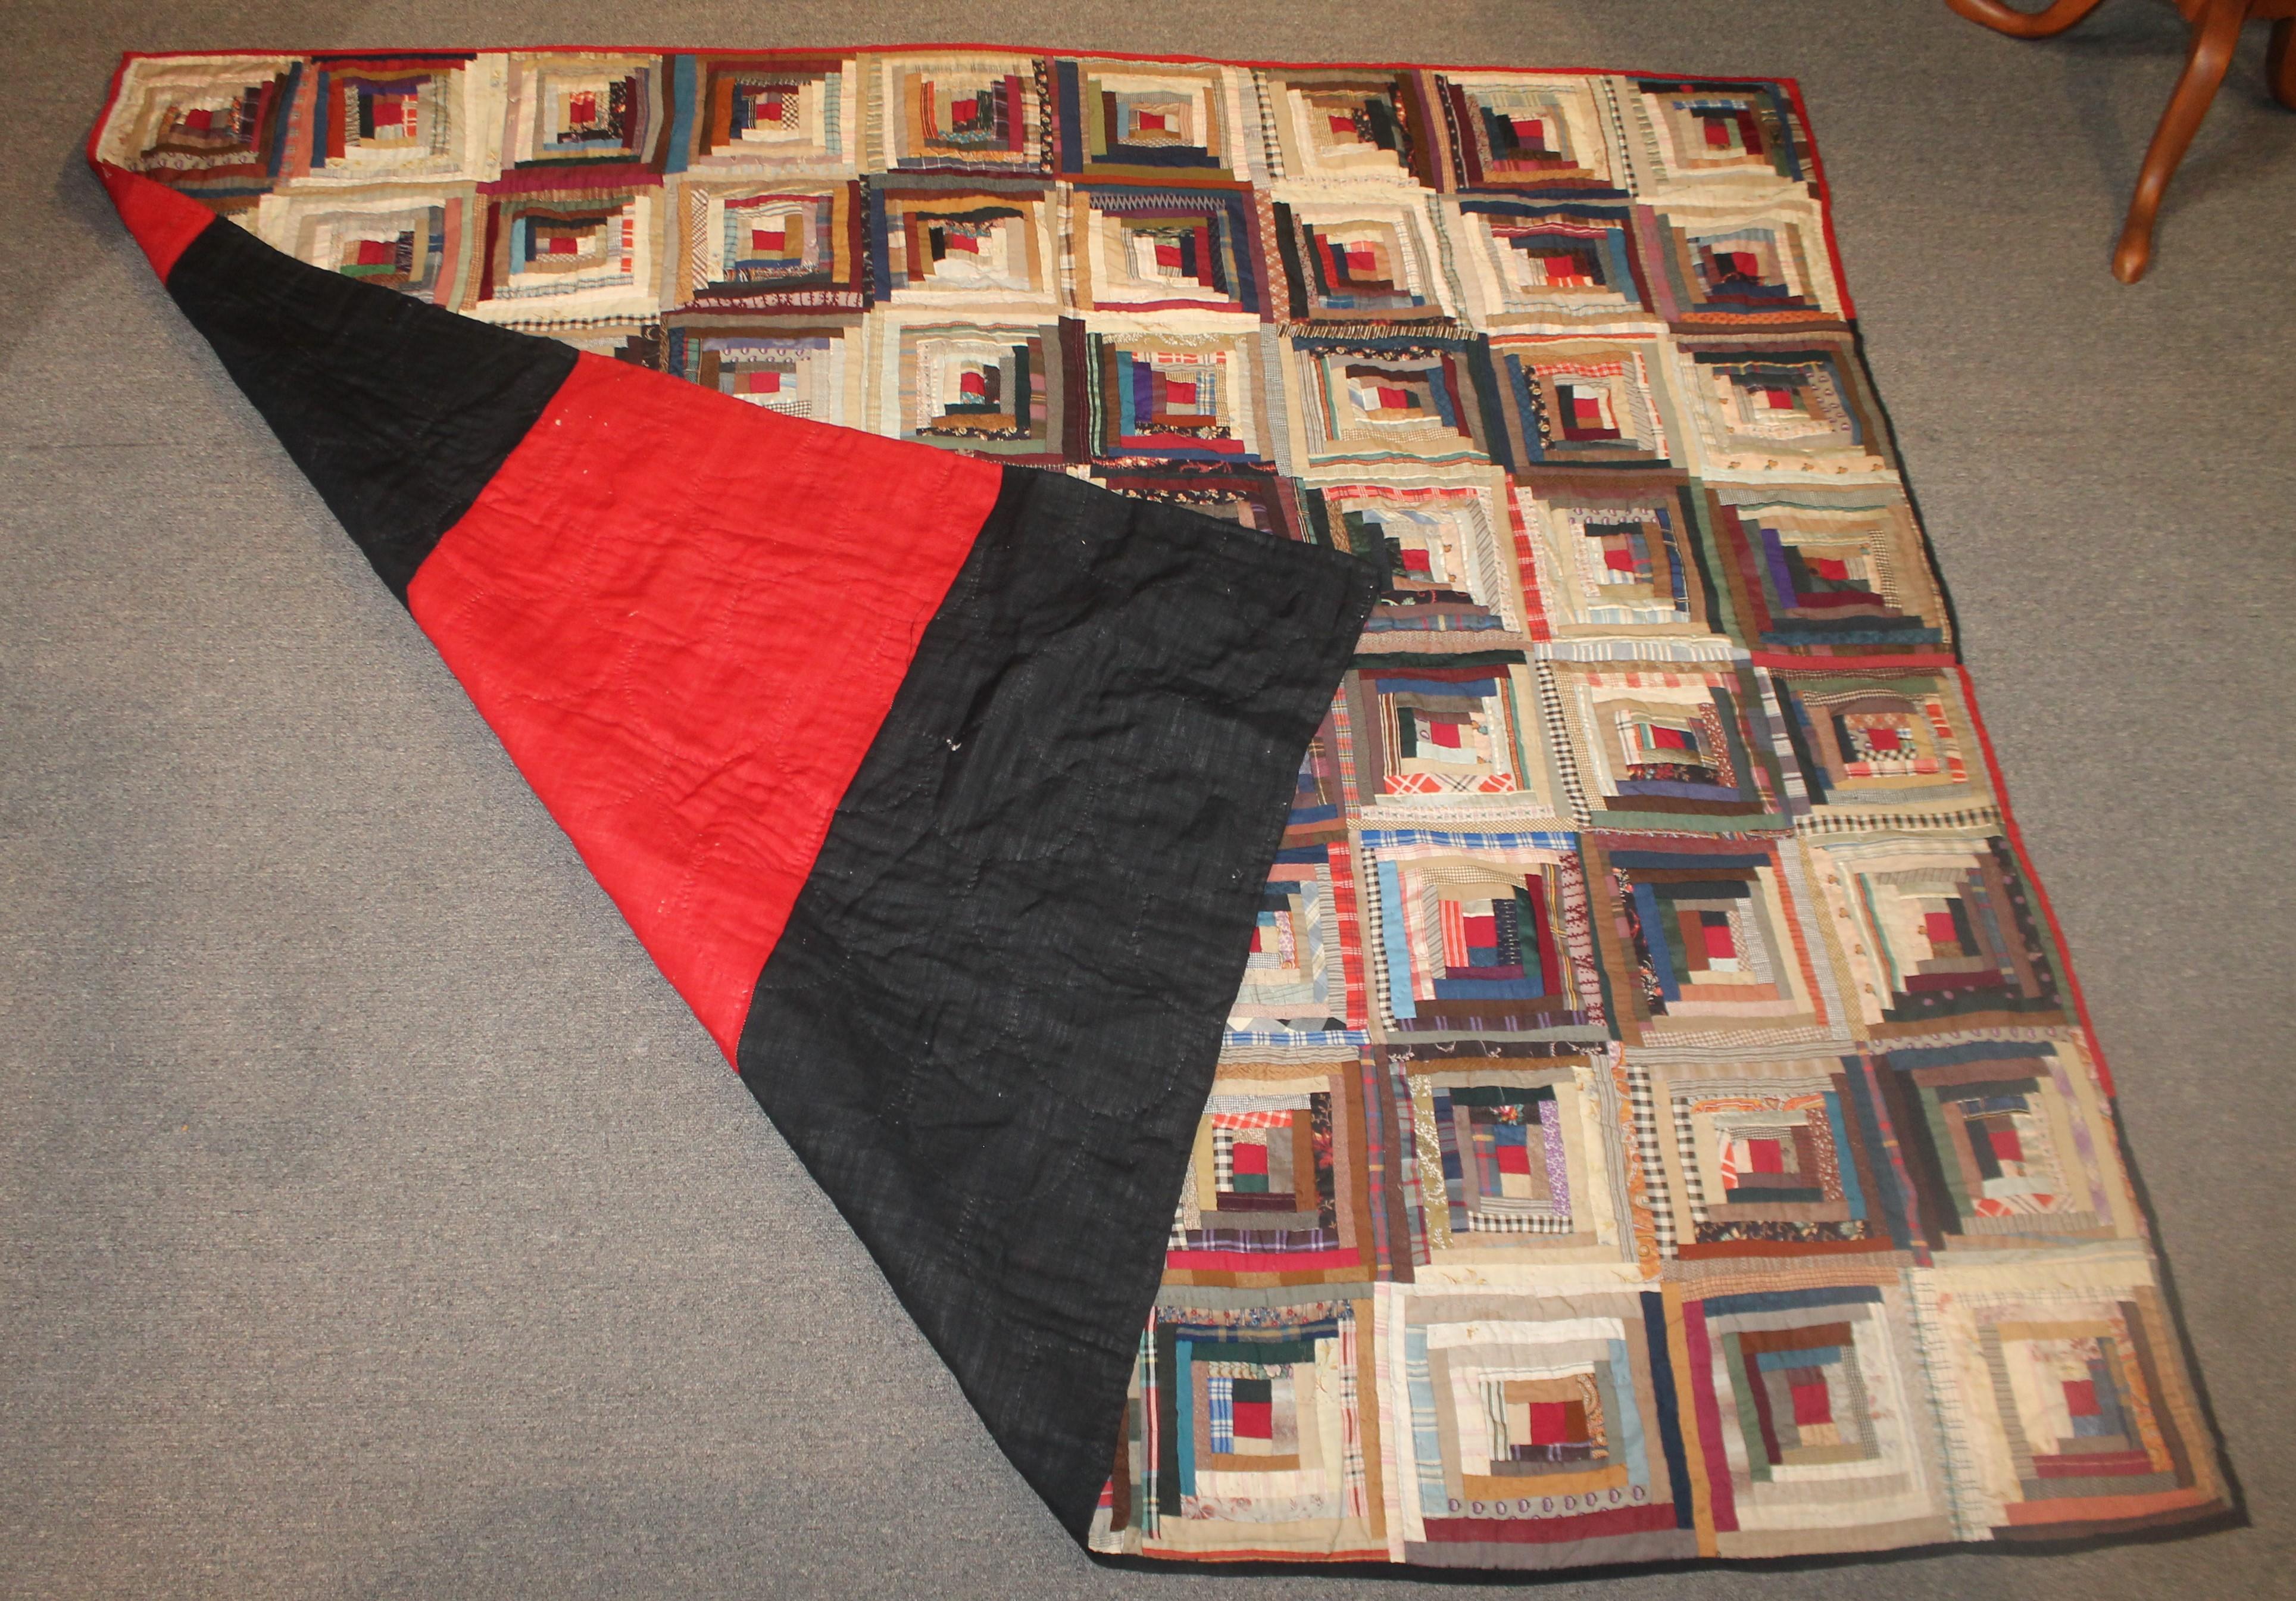 19th century wool log cabin quilt in good condition. This was found in central Pennsylvania. It has a red and black wool bars backing.